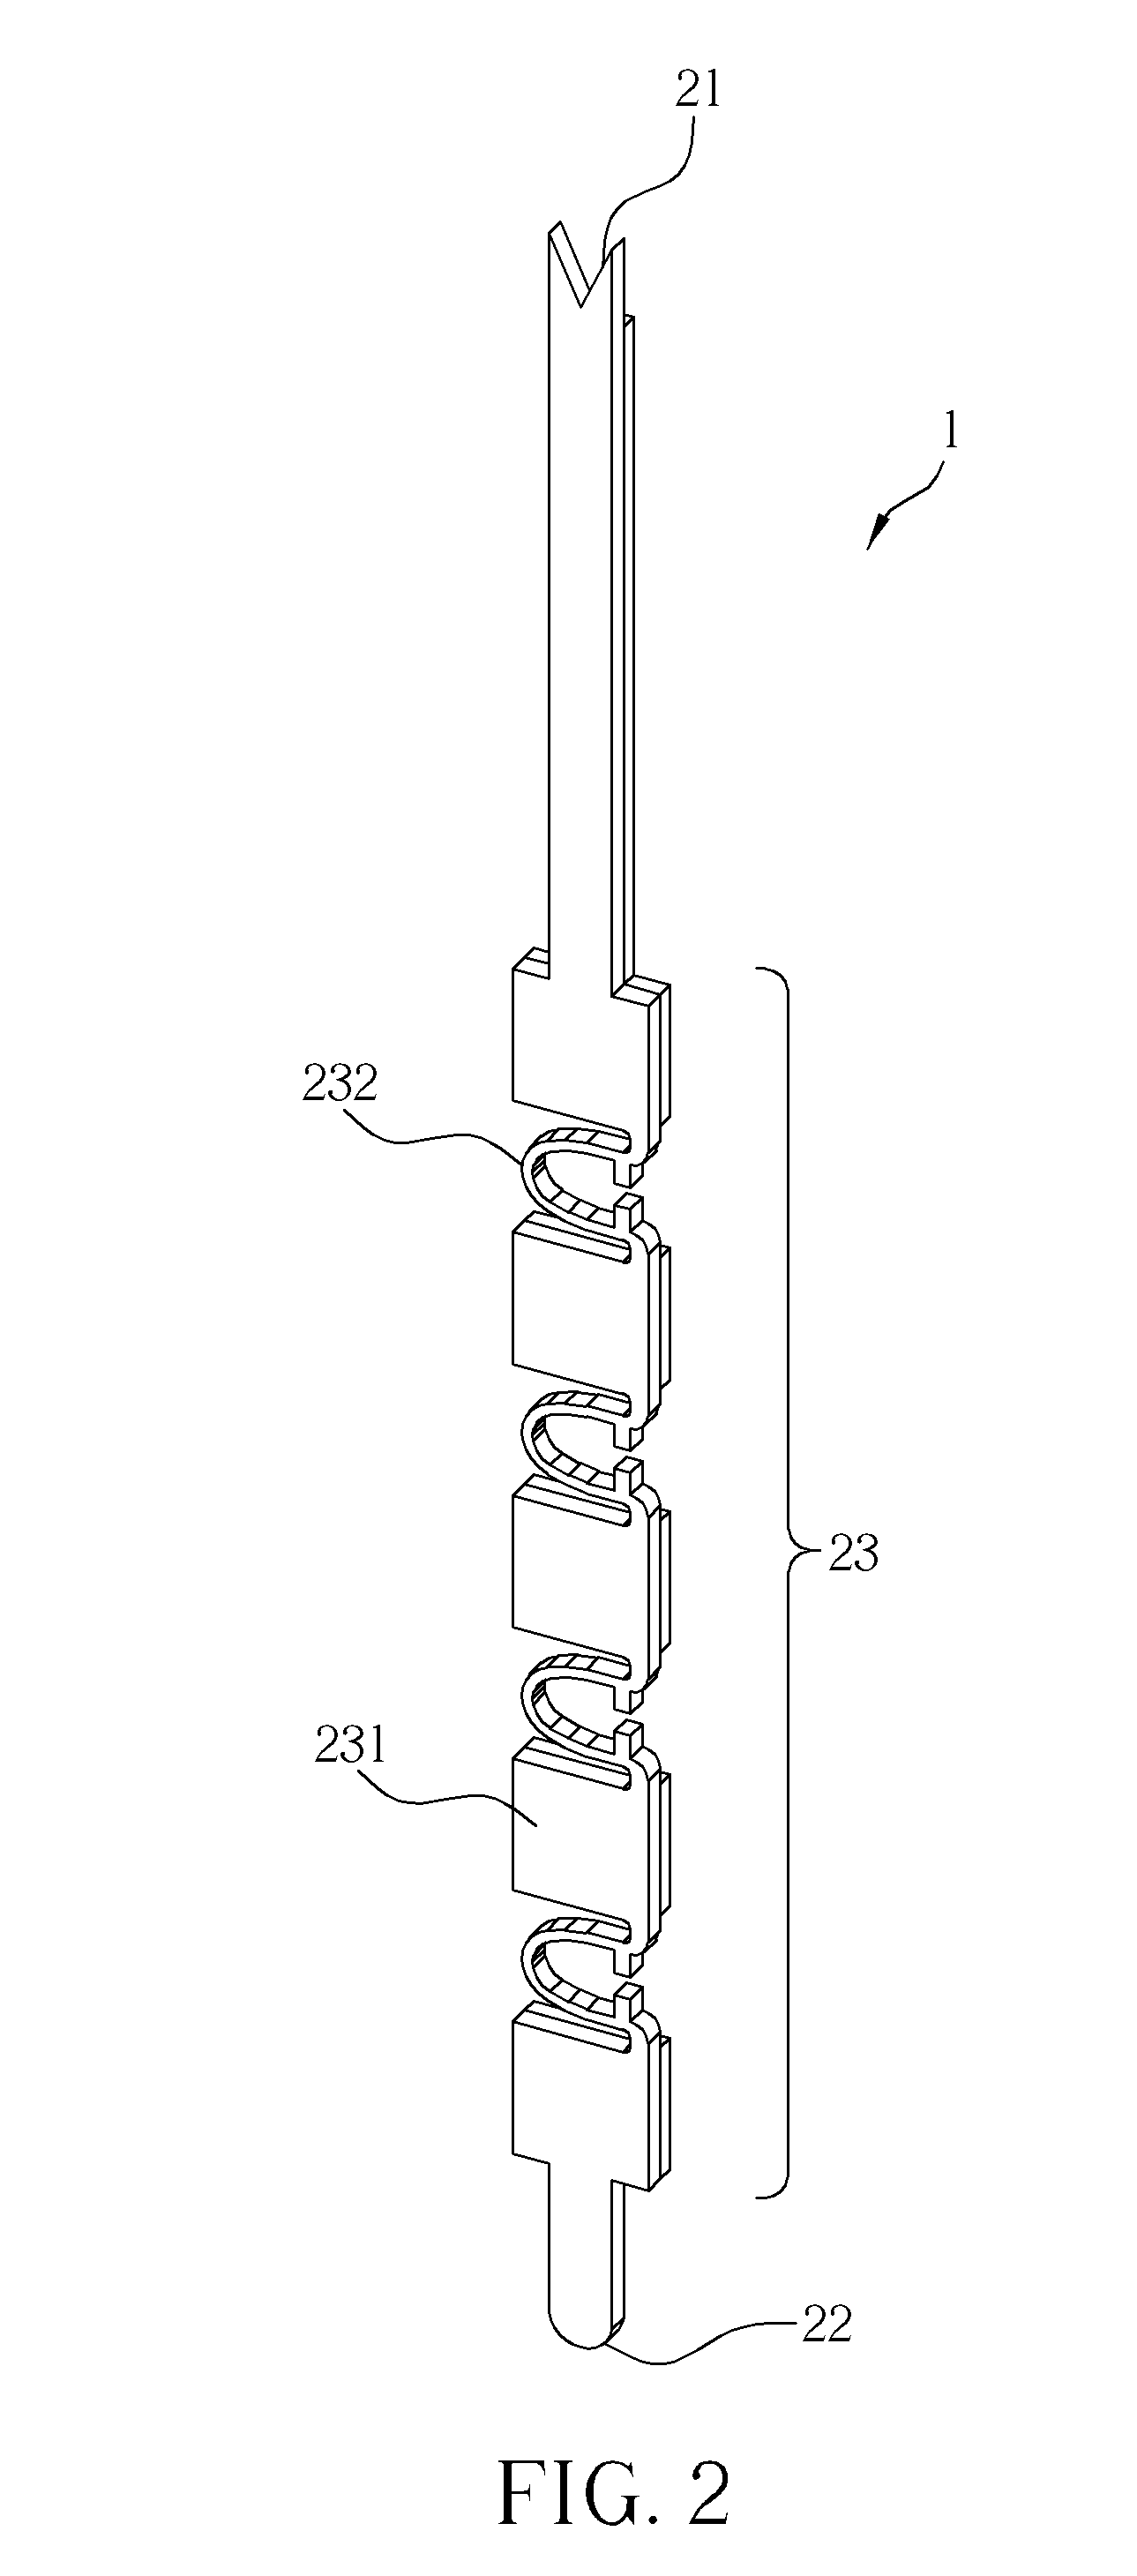 High-frequency vertical spring probe card structure